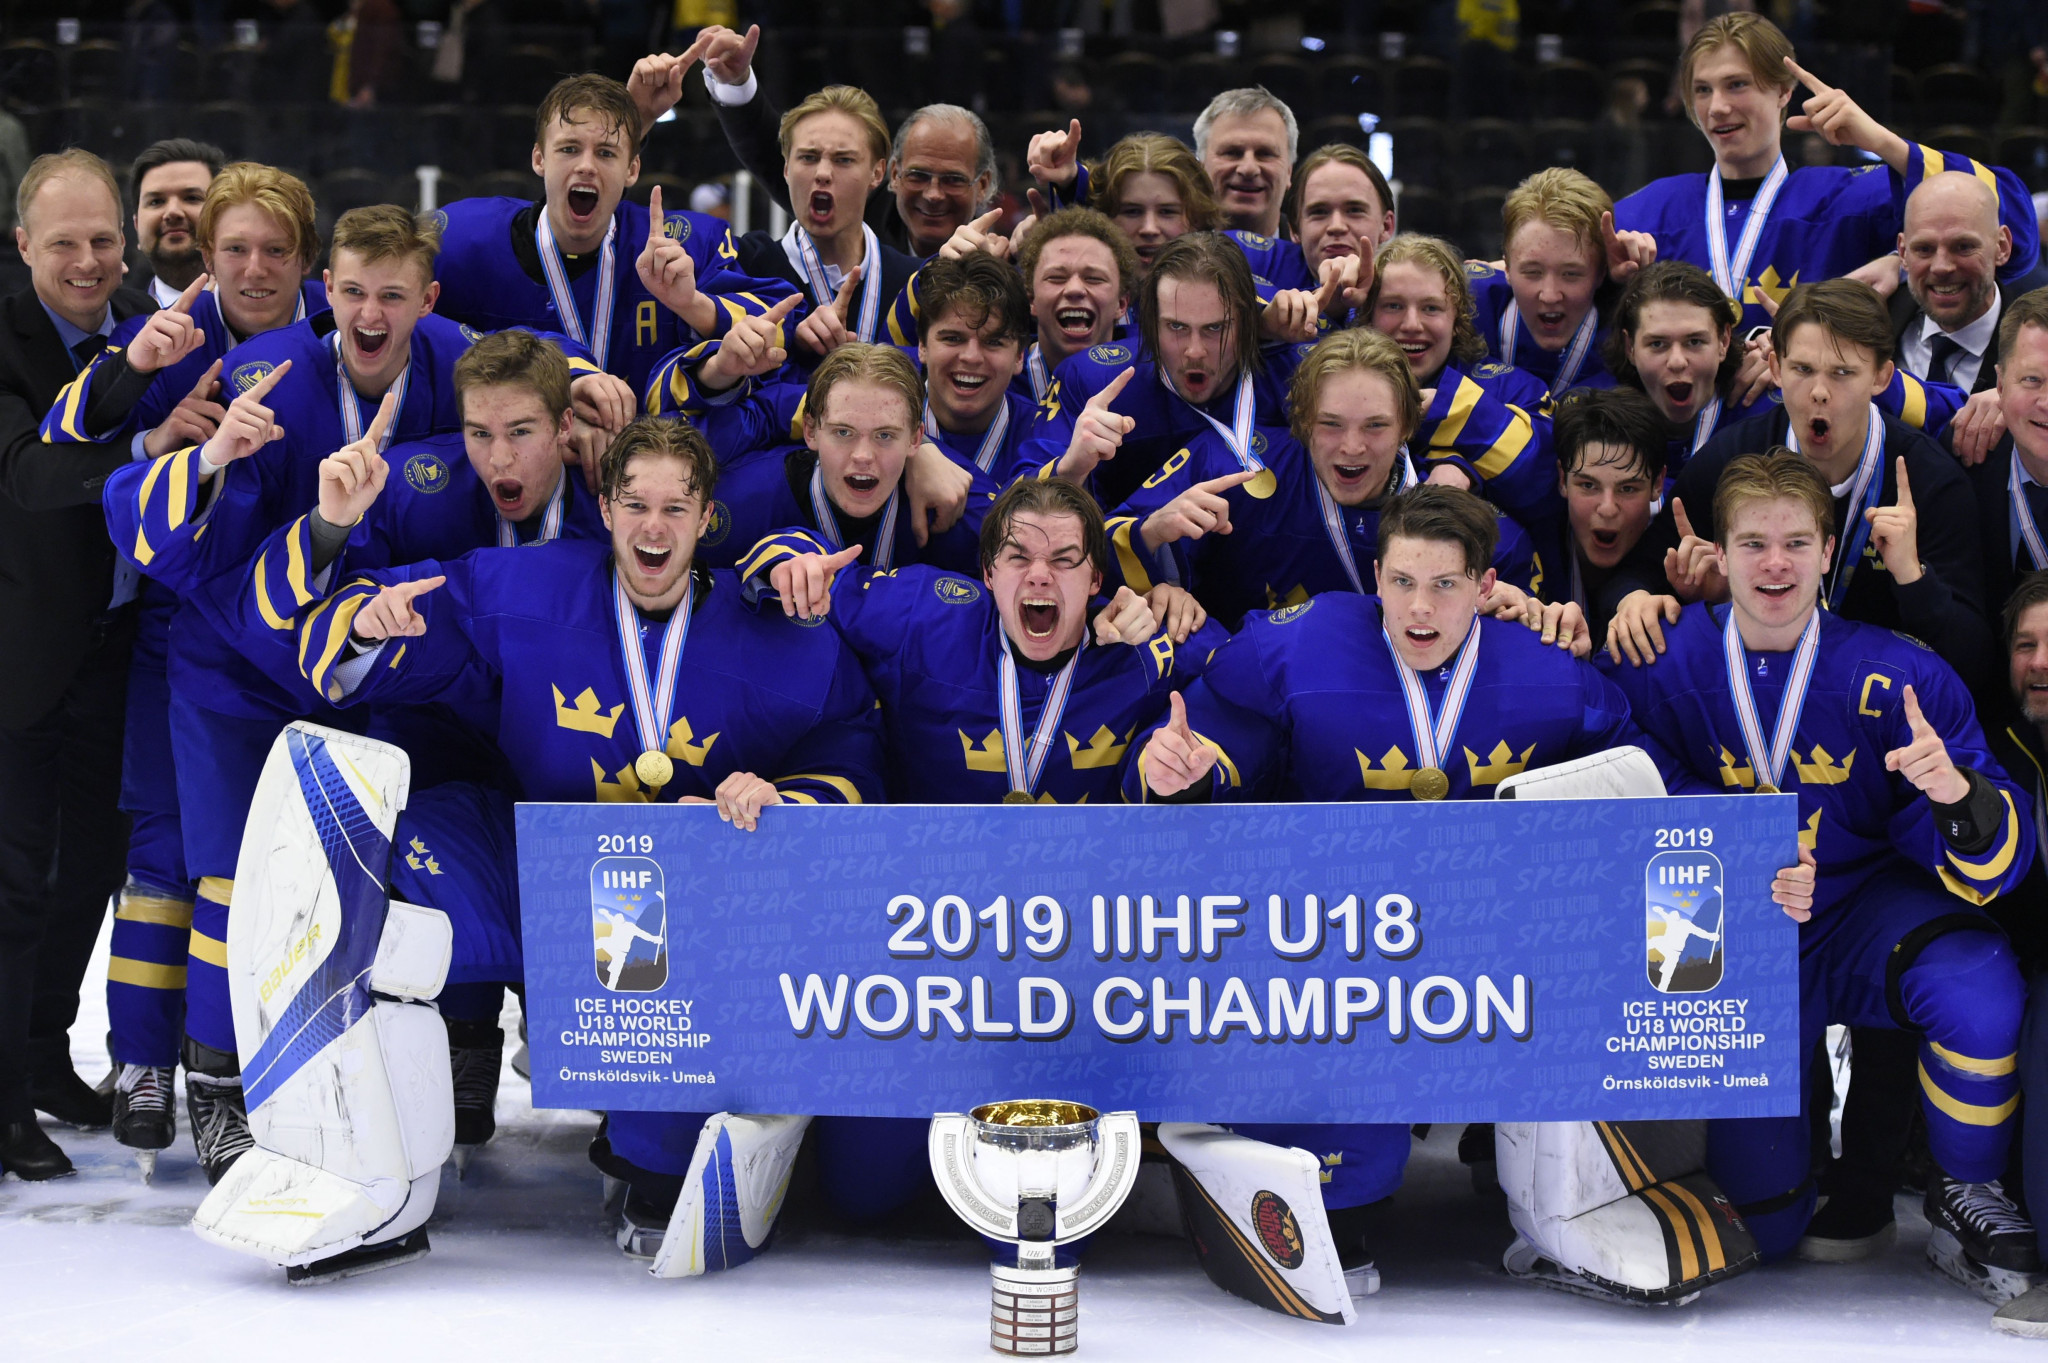 Hosts Sweden triumphed at the 2019 IIHF Under-18 World Championship ©Getty Images